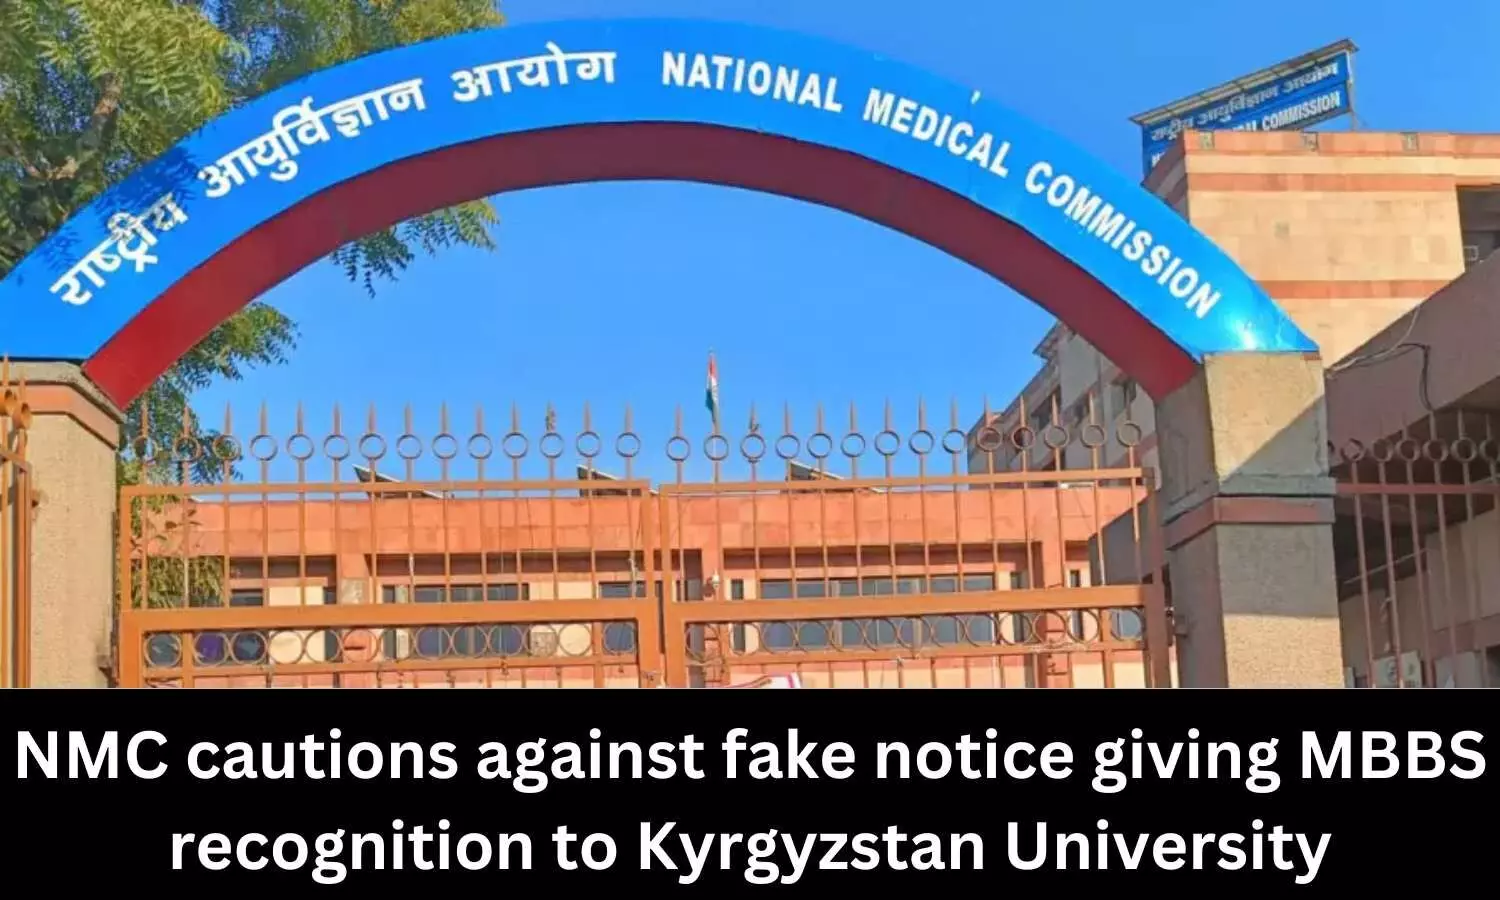 NMC cautions against fake notice giving MBBS recognition to Kyrgyzstan University